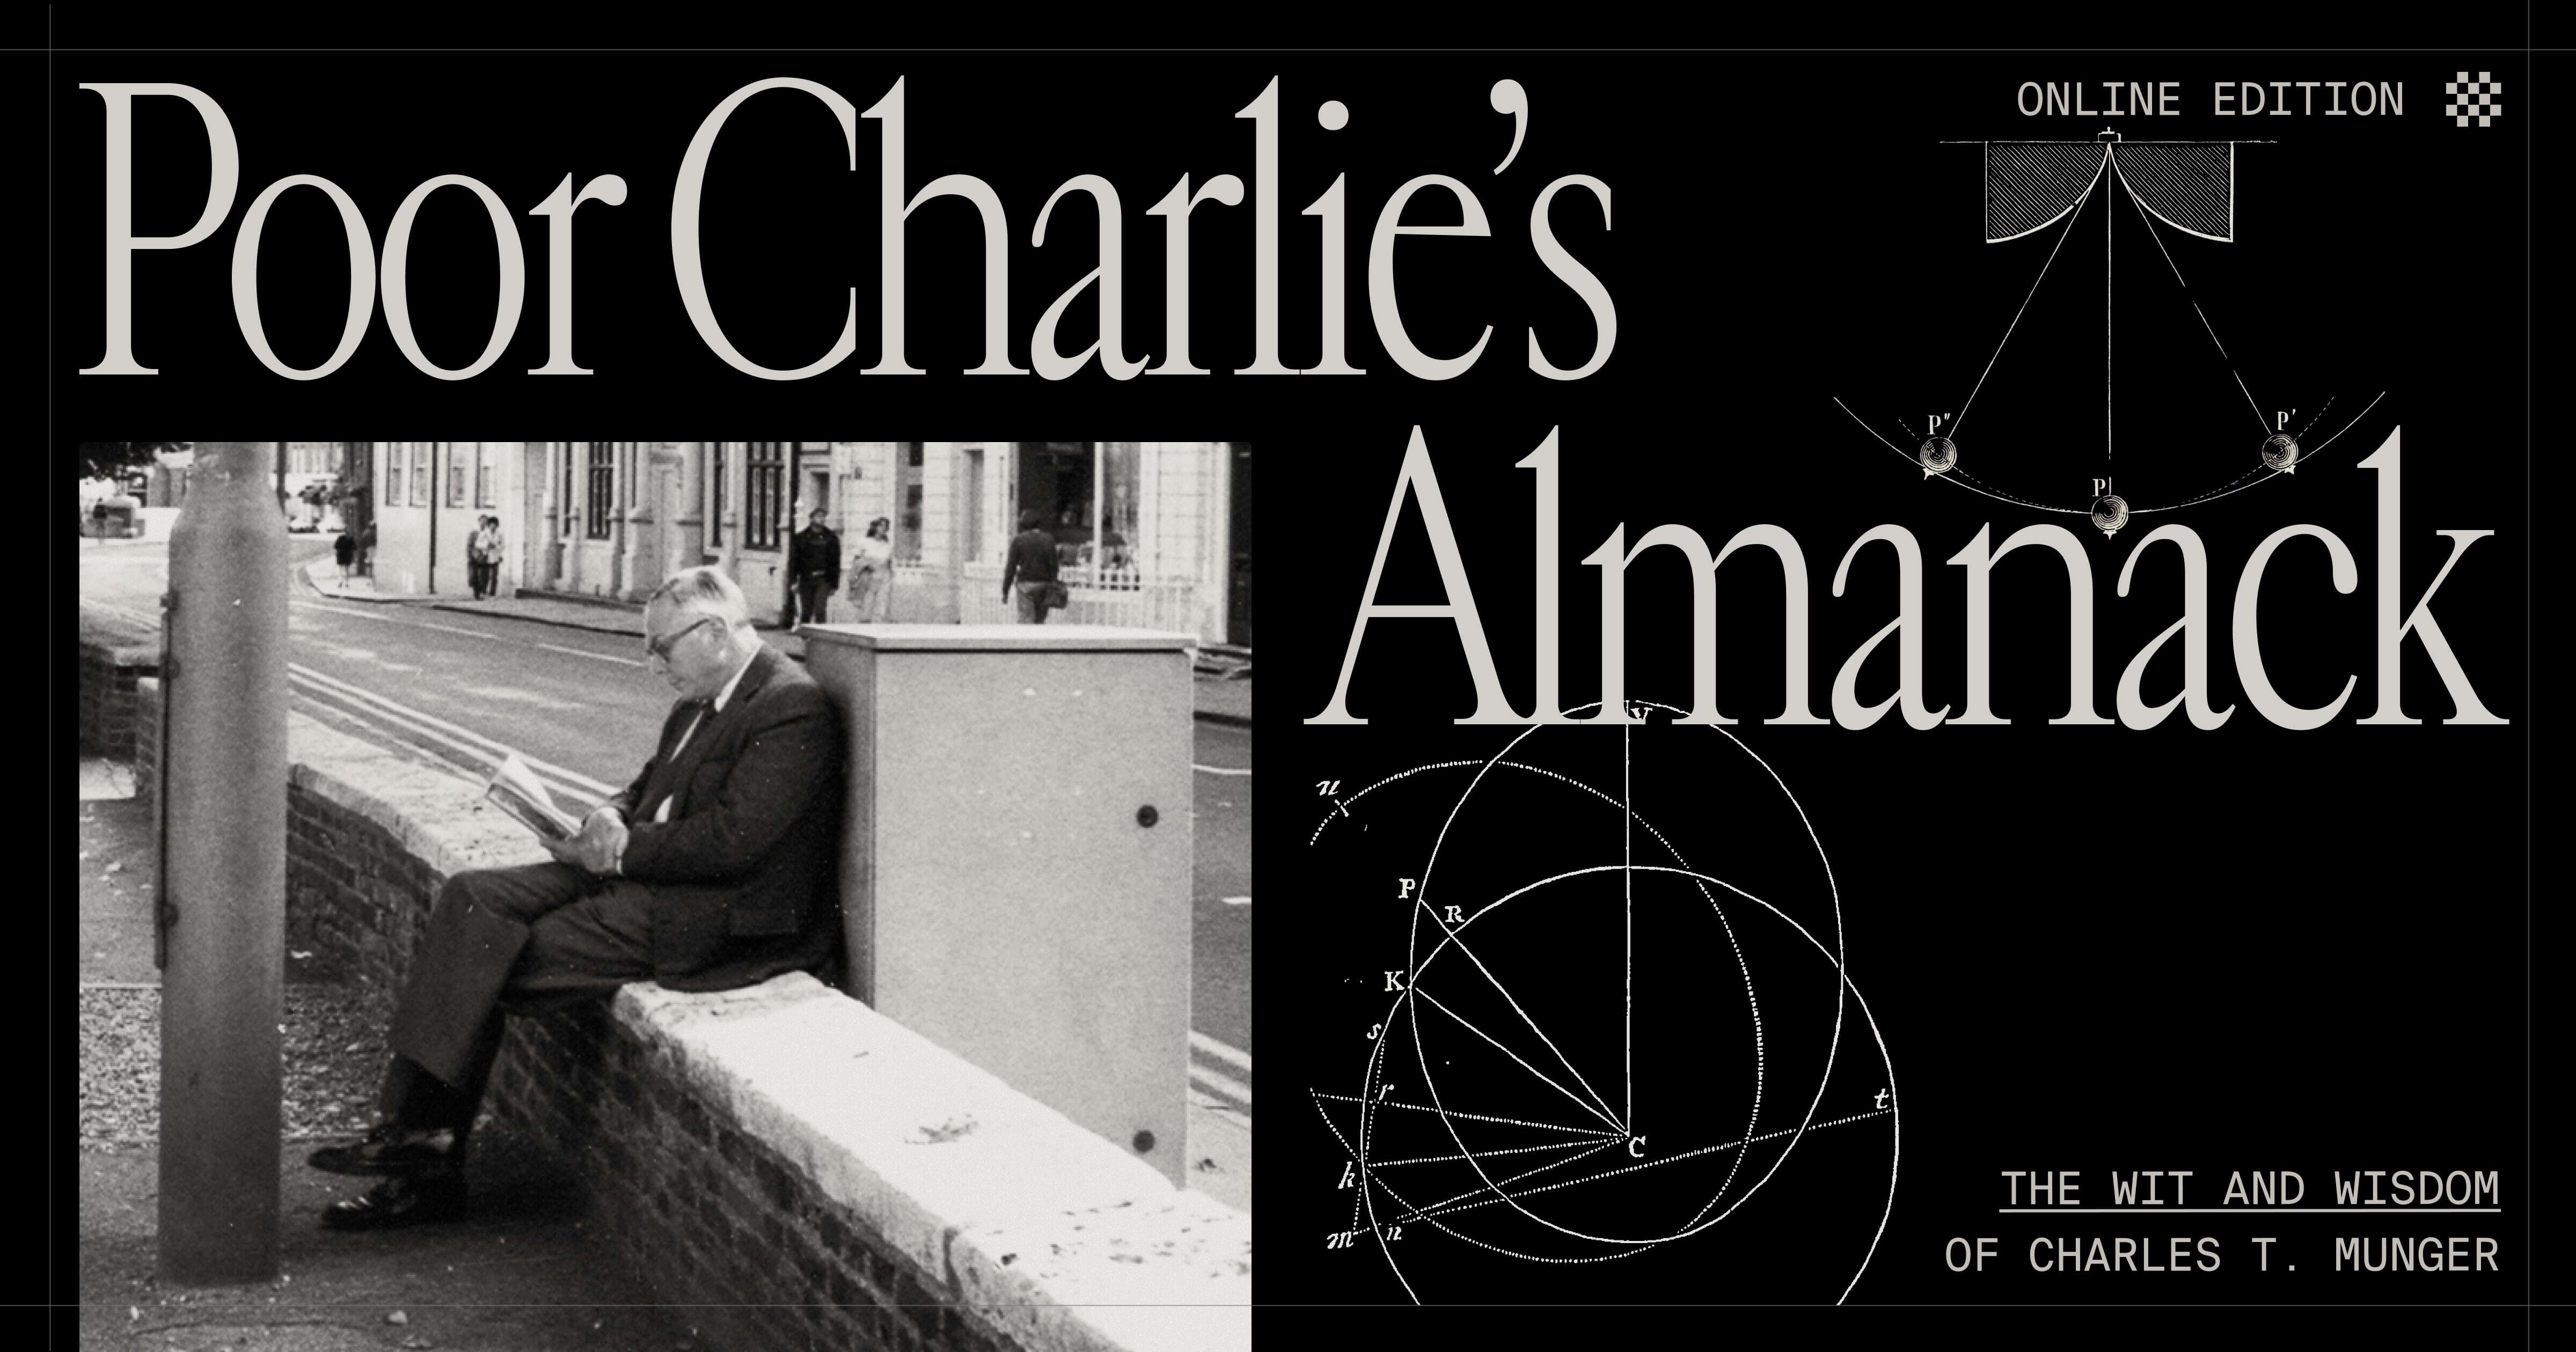 Poor Charlie’s Almanack: The Essential Wit and Wisdom of Charles T. Munger thumbnail